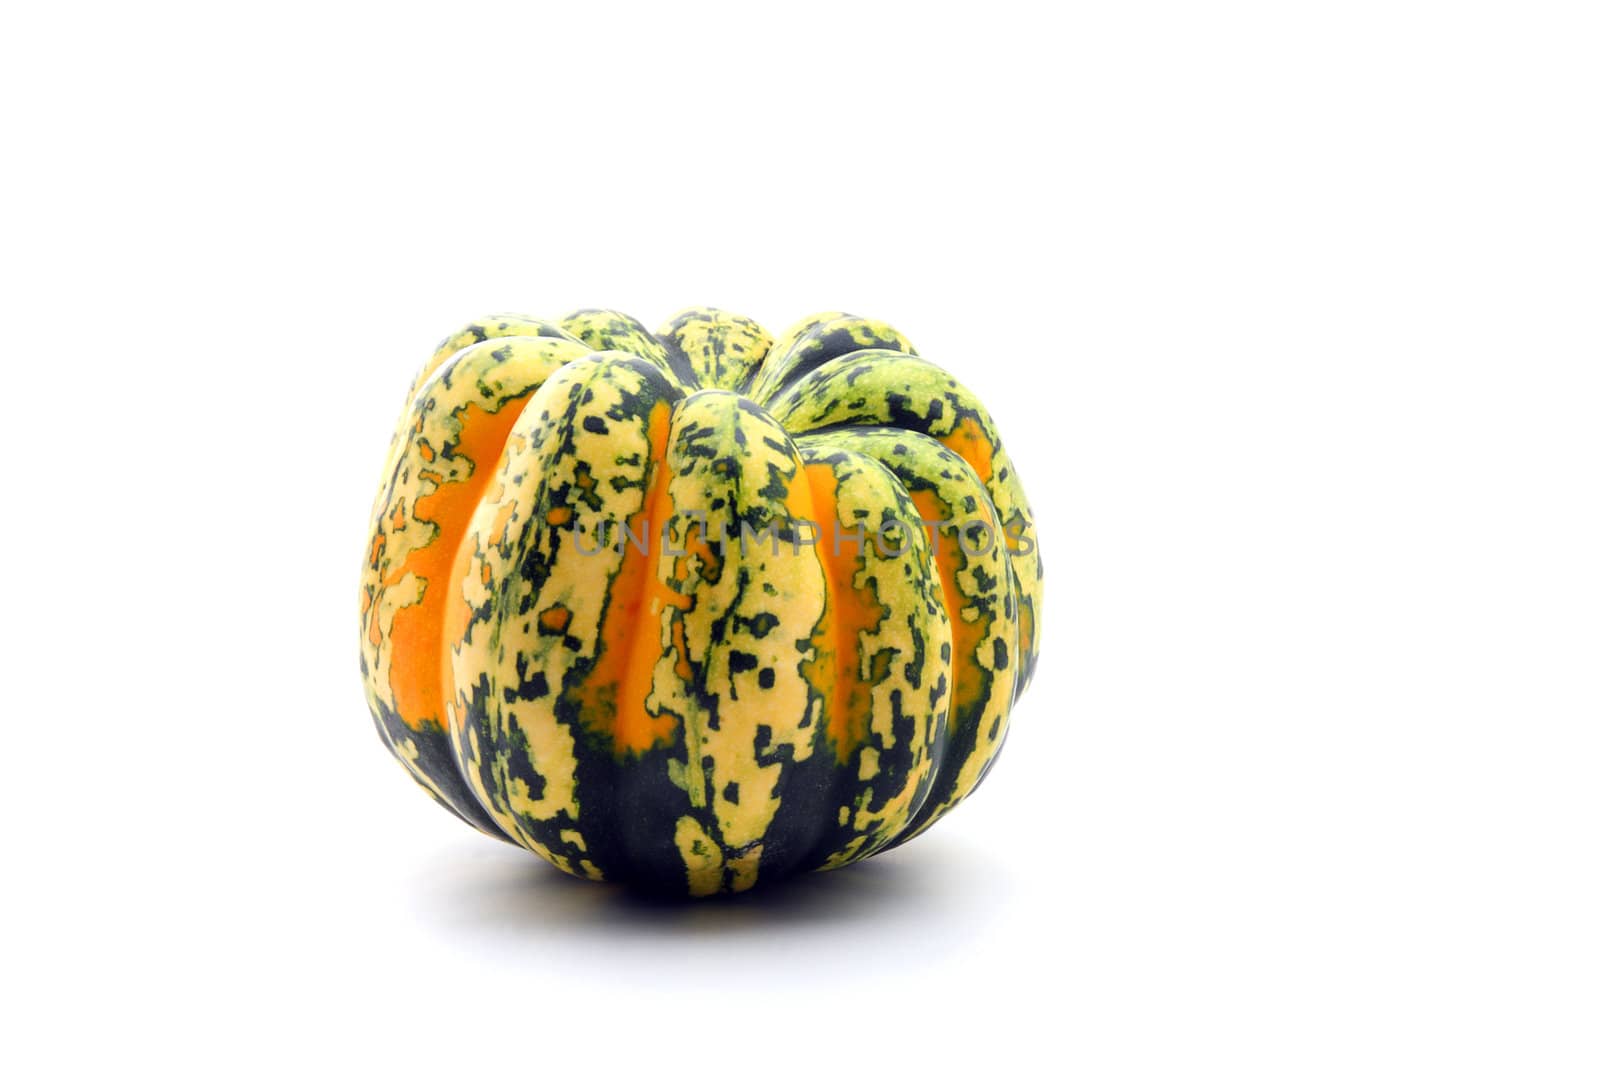 Colorful autumn orange and green squash isolated on white